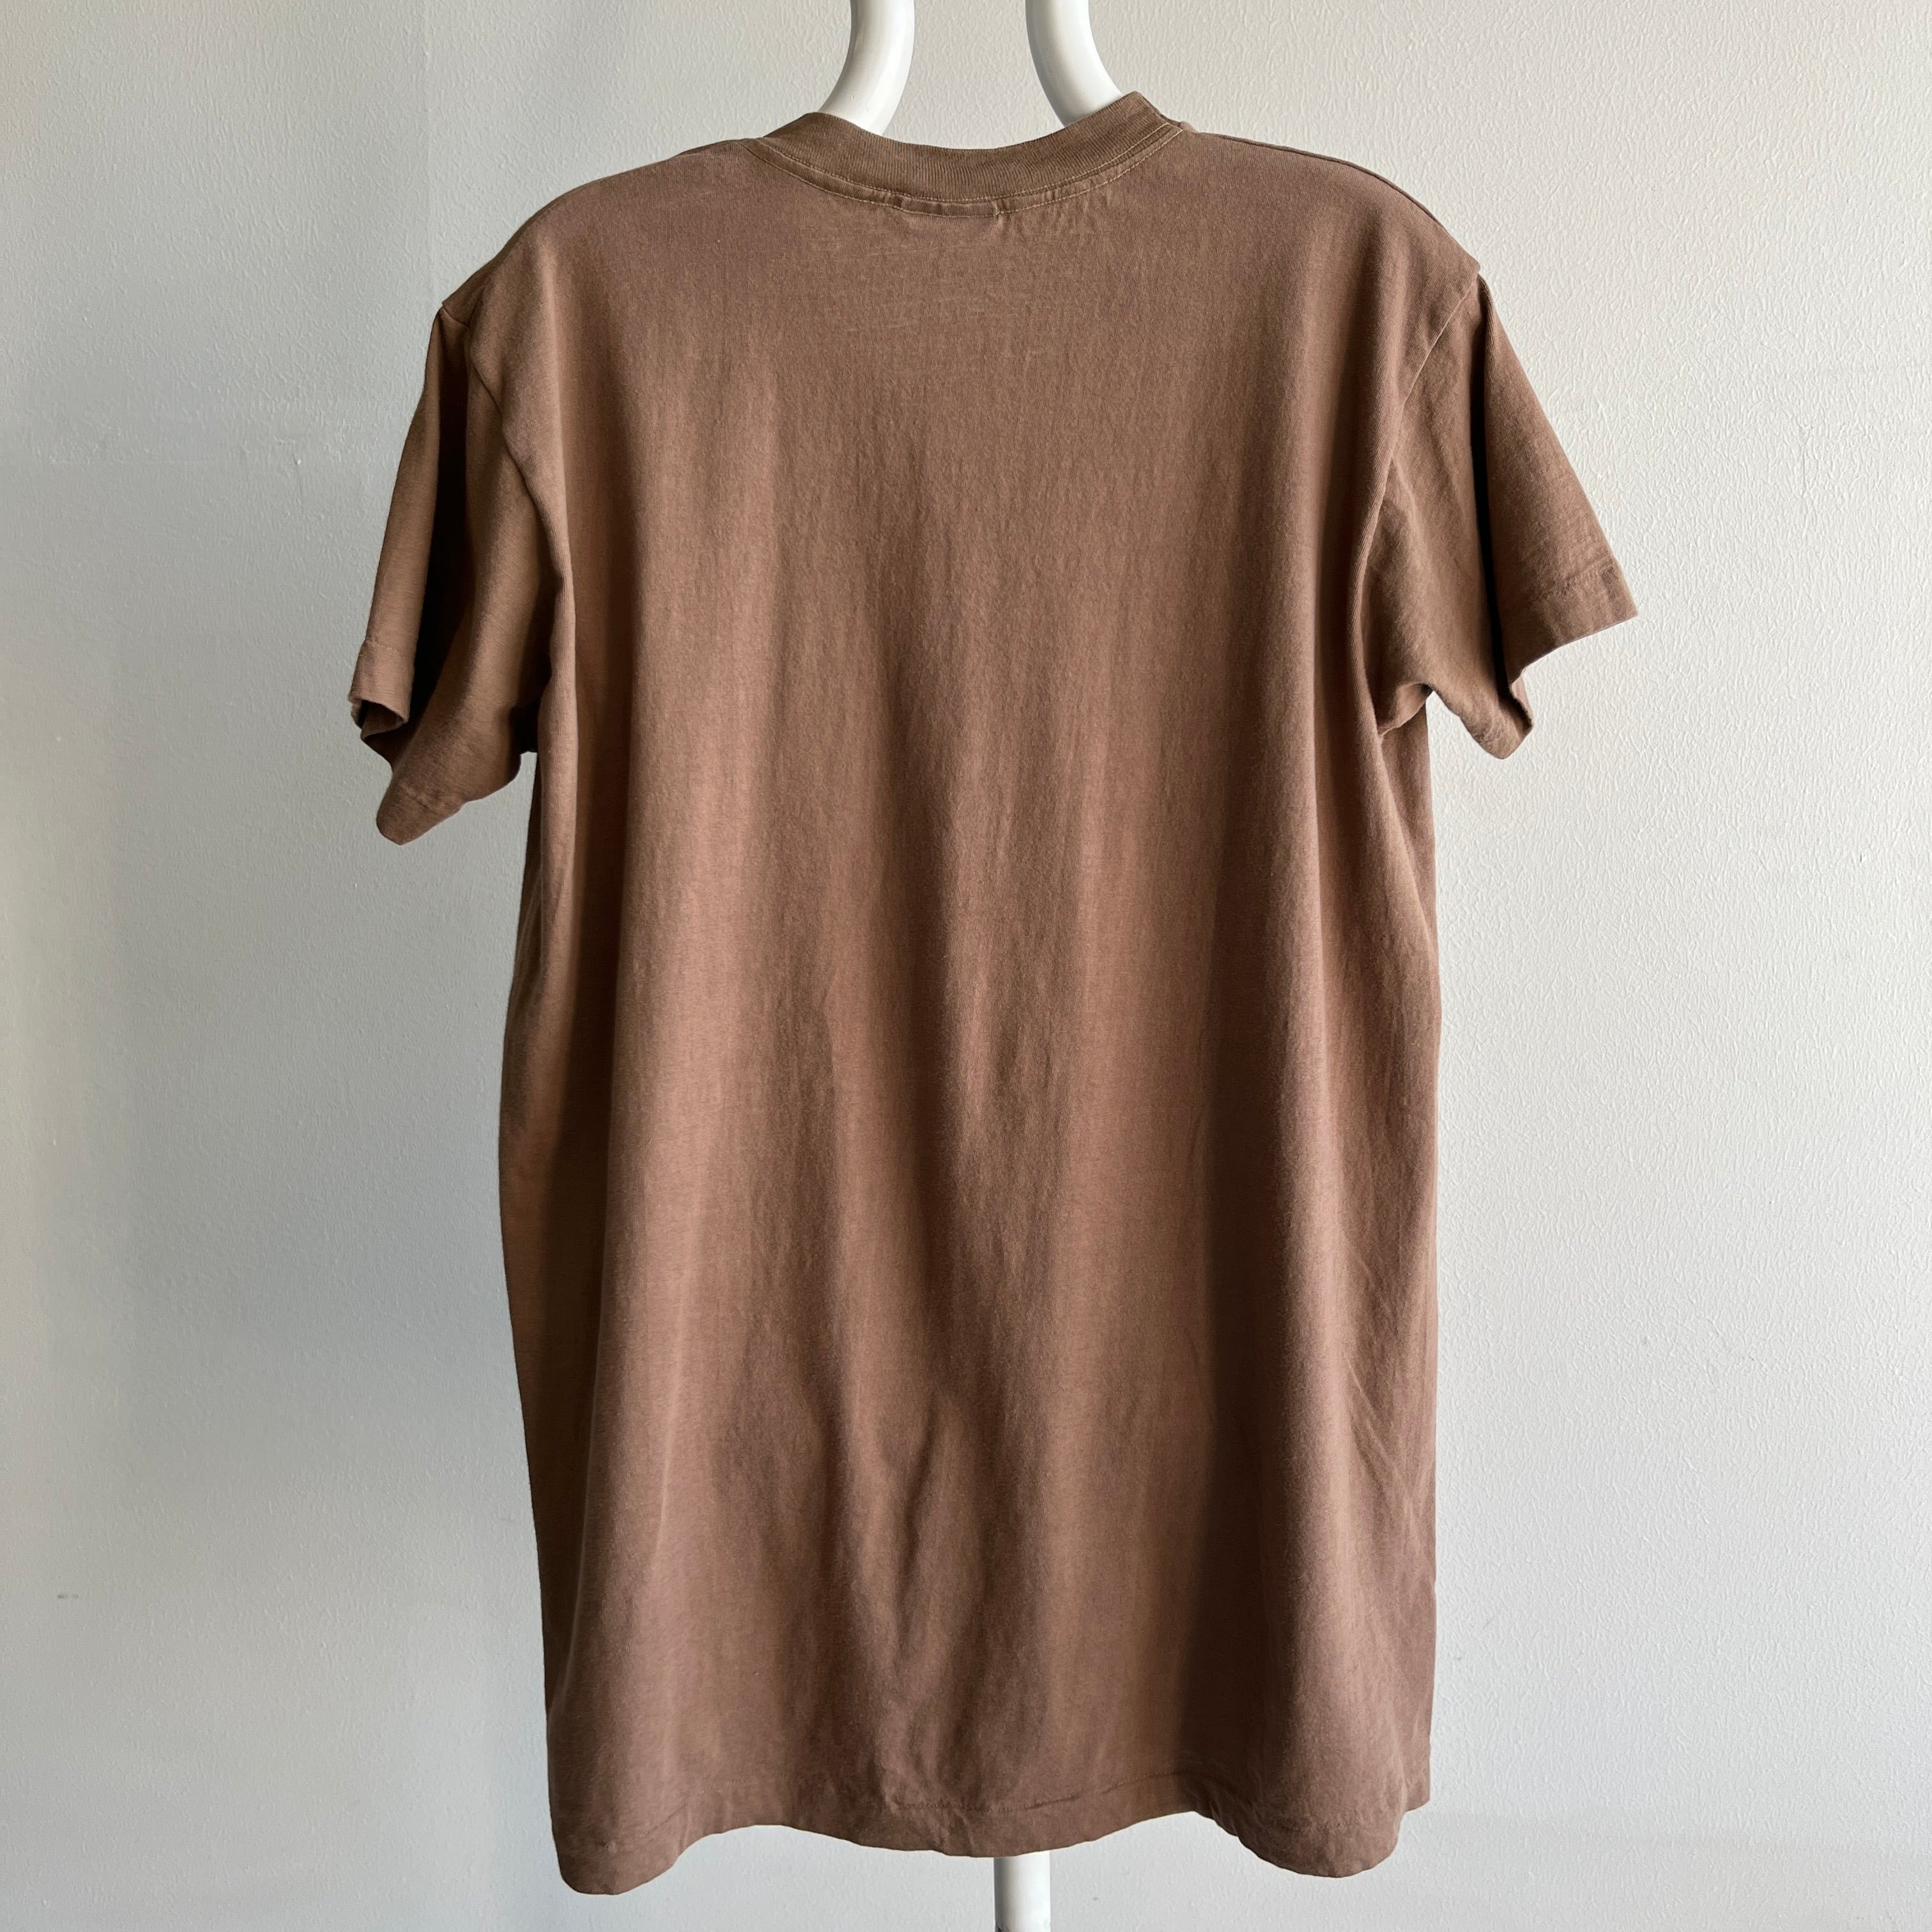 1990 Army Issued Cafe Au Lait Colored Blank Cotton T-Shirt